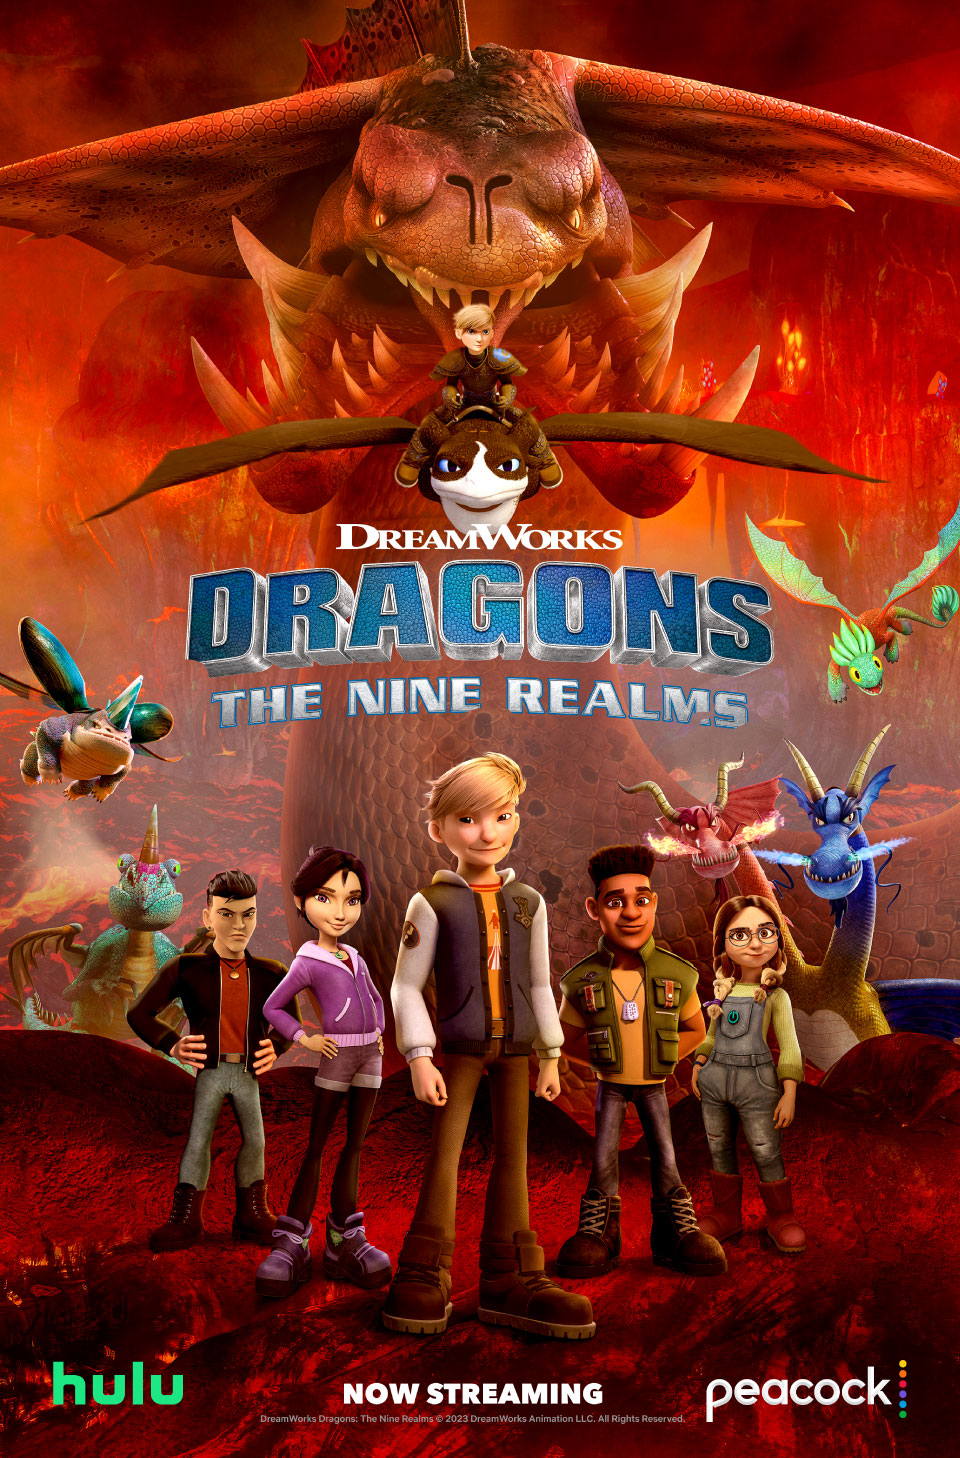 Dragons: Race To The Edge, Roblox Wiki